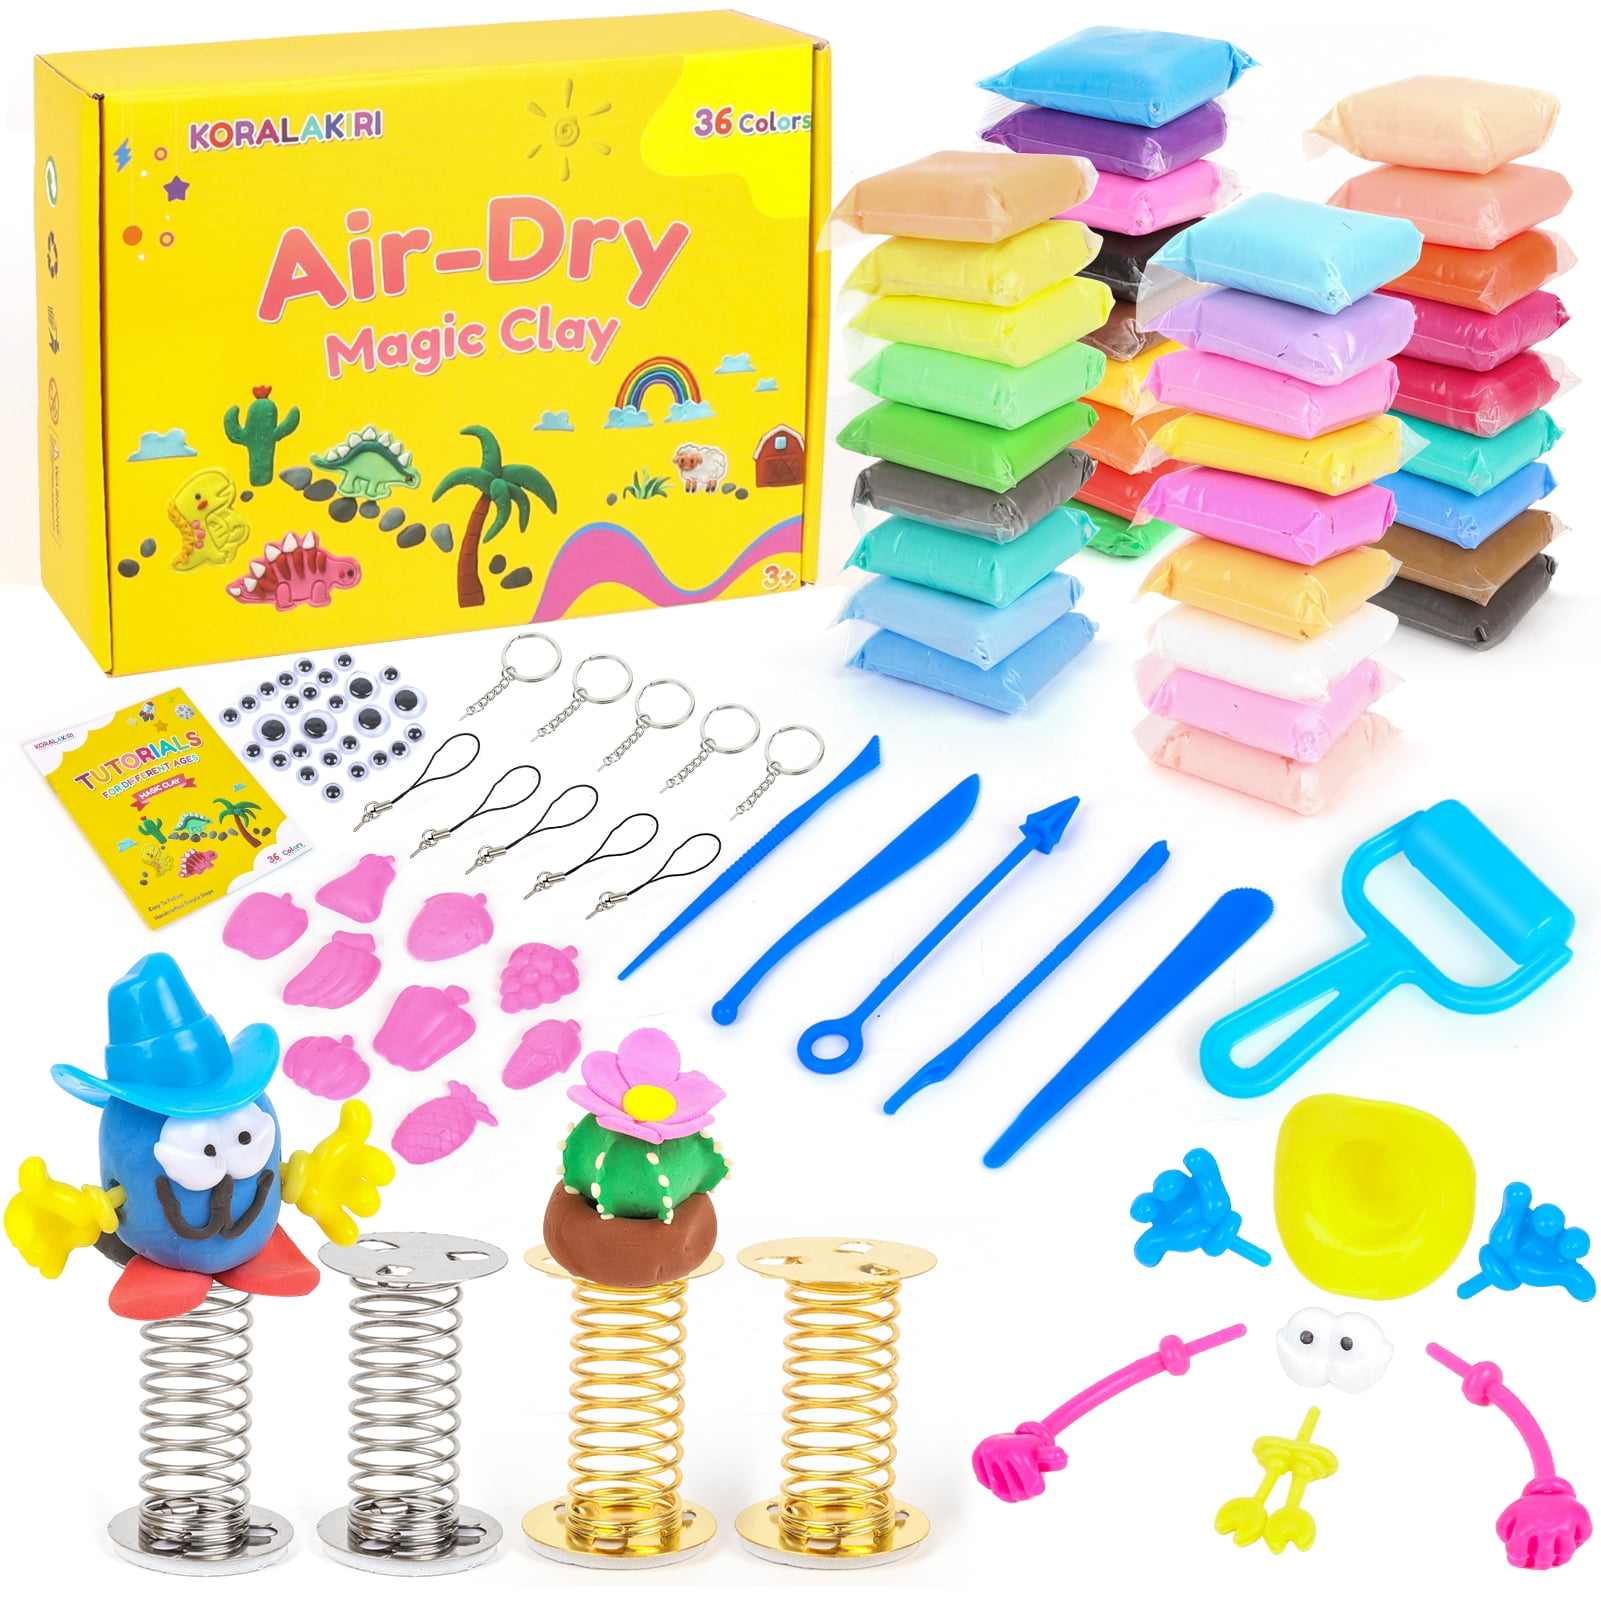 TOYLI Unicorn Modeling Clay Kit with Pink Sparkly Foam Beads and